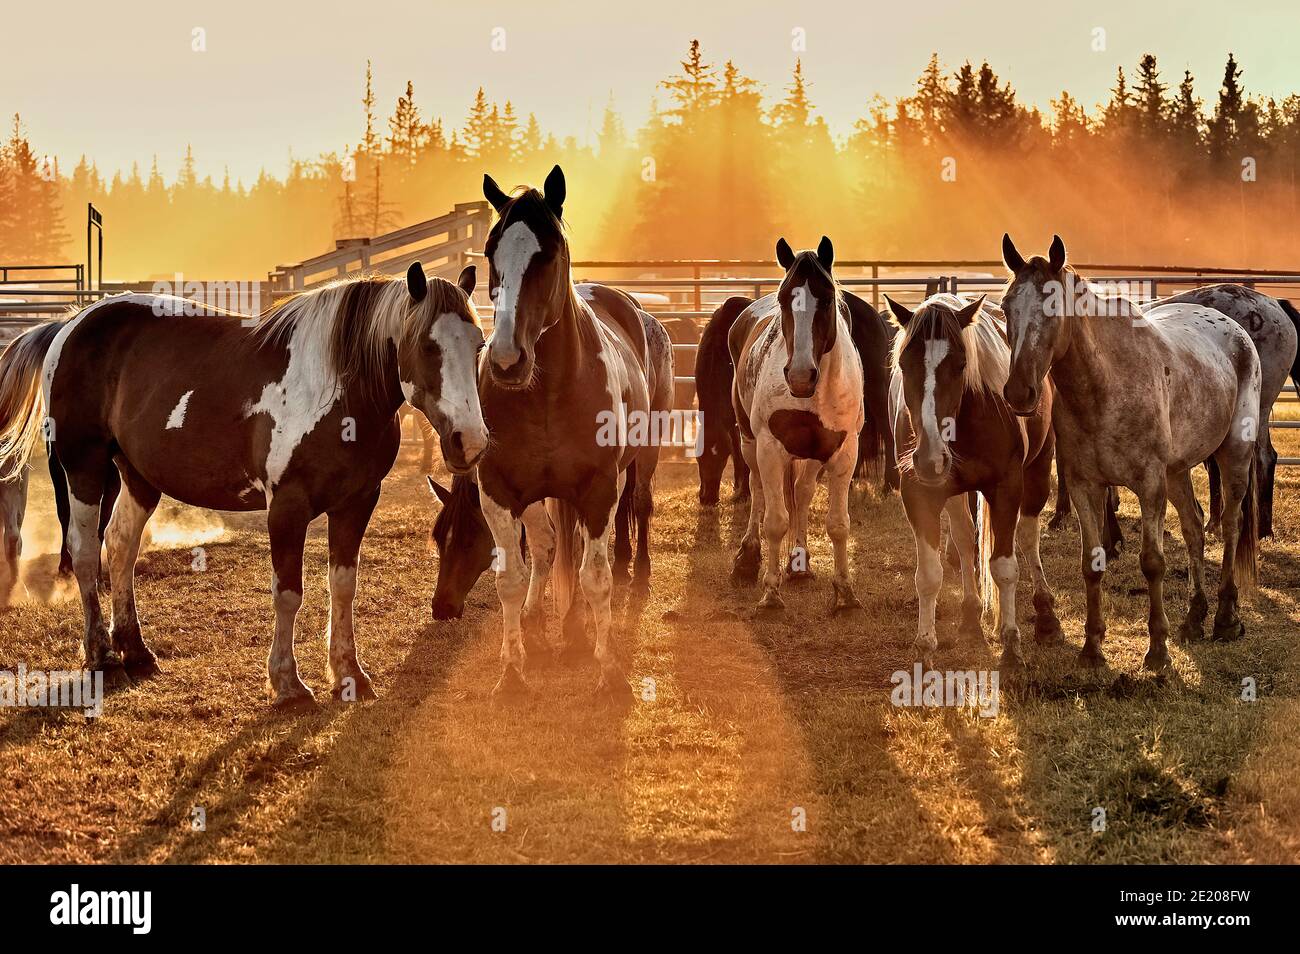 A herd of domestic horses standing backlit by the setting sun in rural Alberta Canada Stock Photo